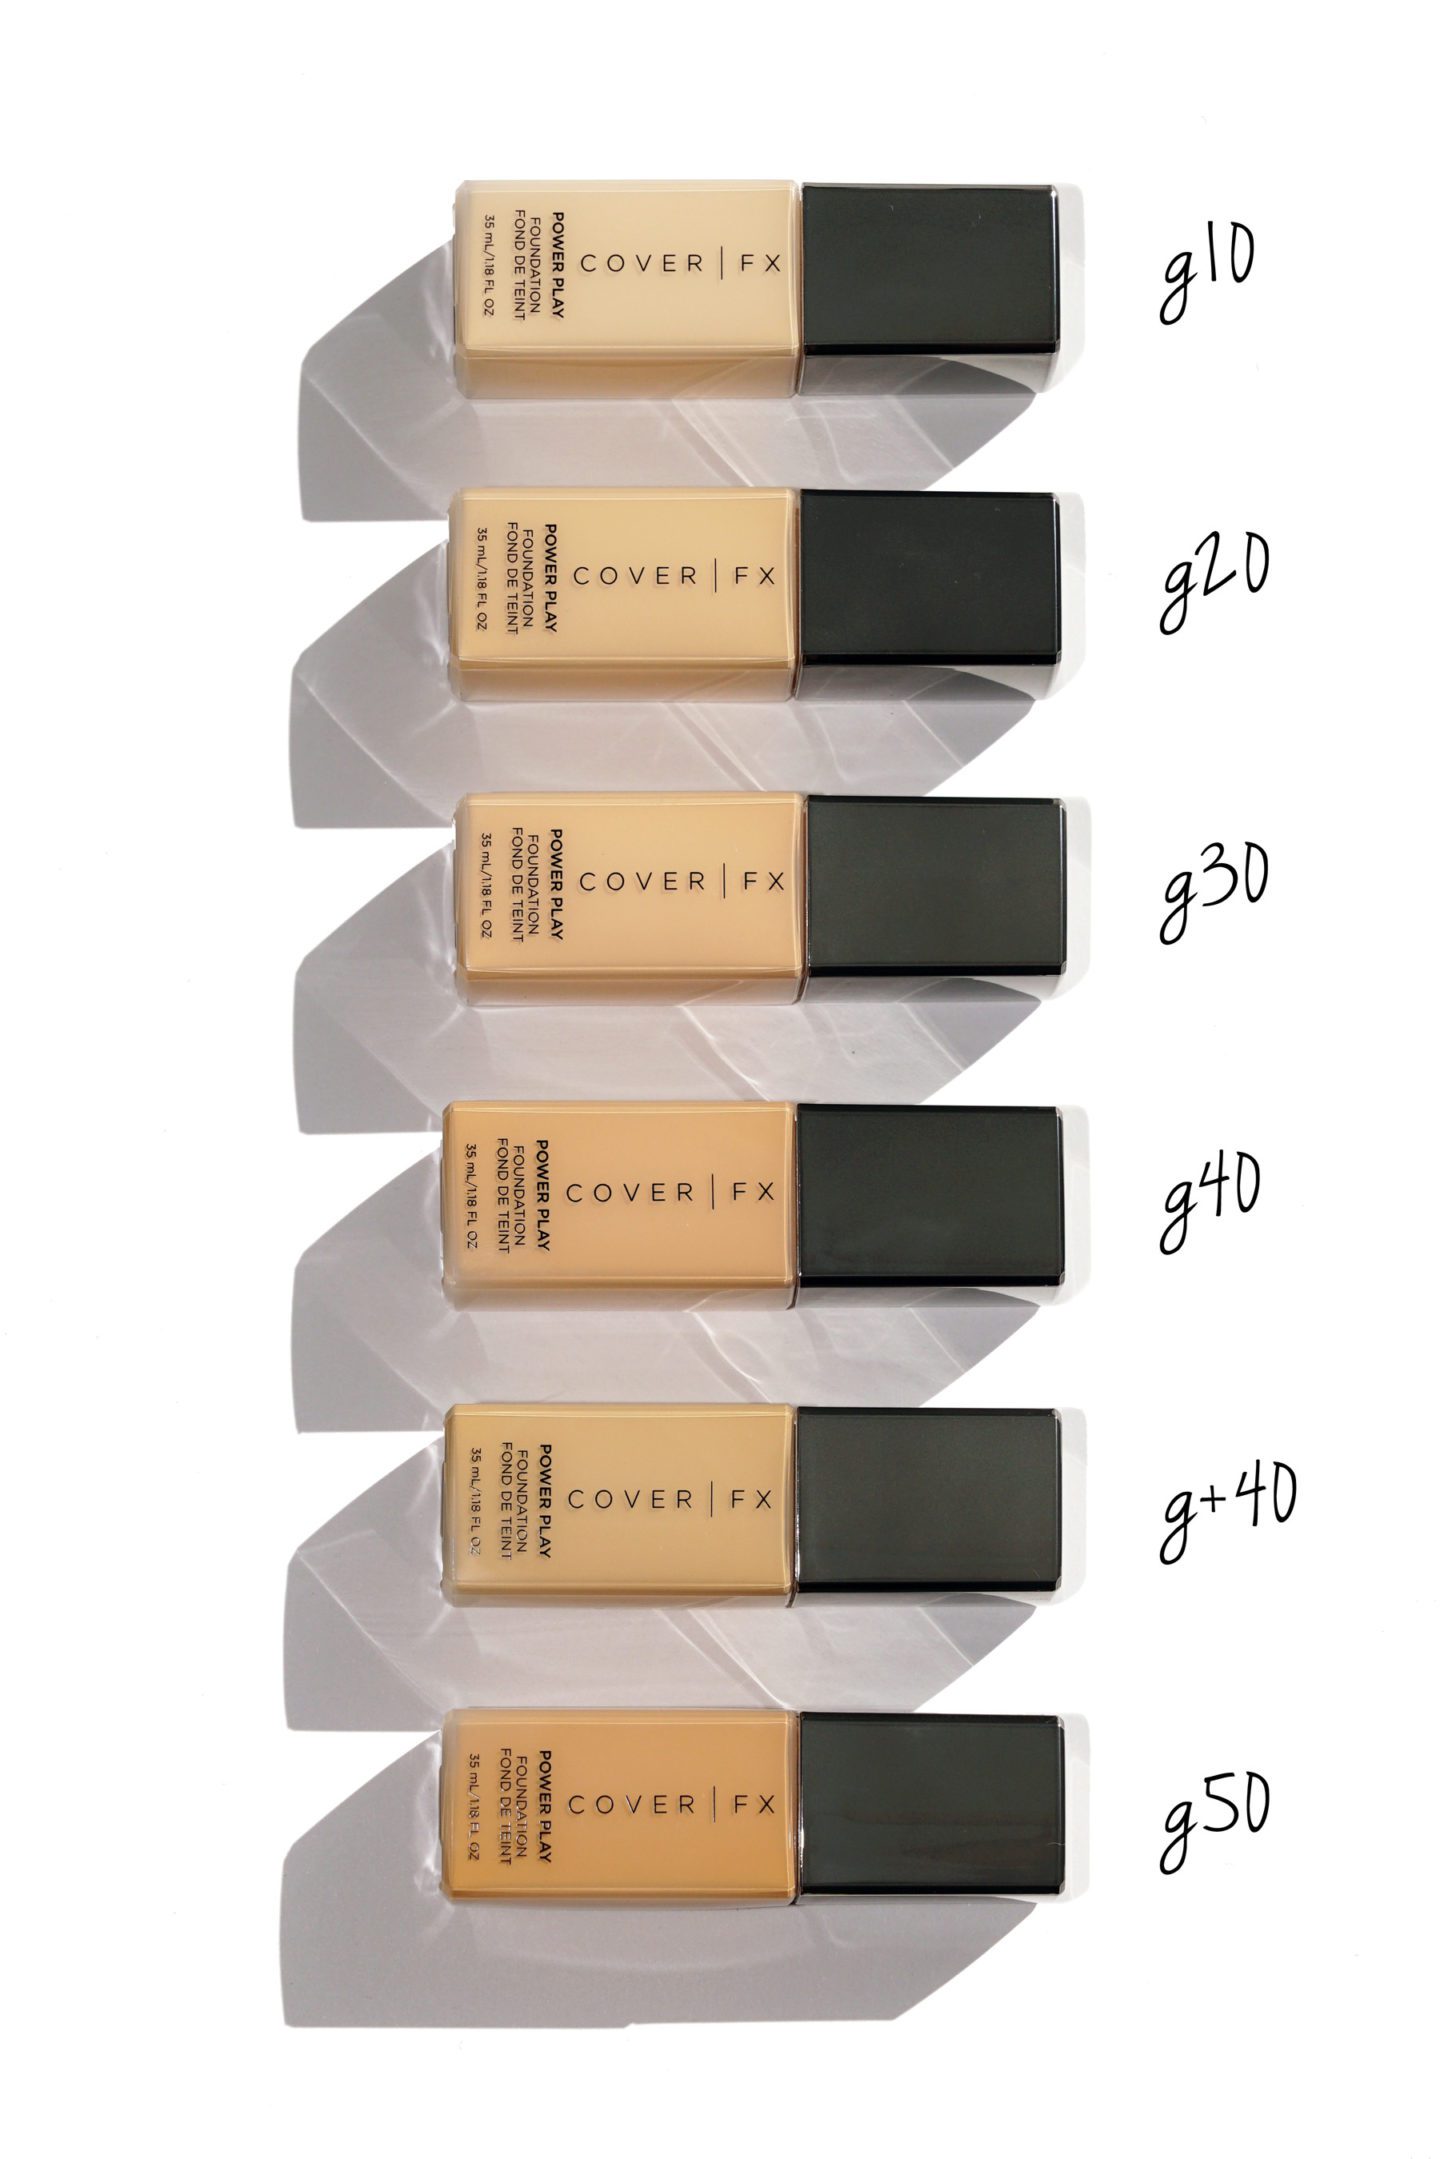 Cover FX Power Play Foundation Review and Swatches G10, G20, G30, G40, G+40 and G50